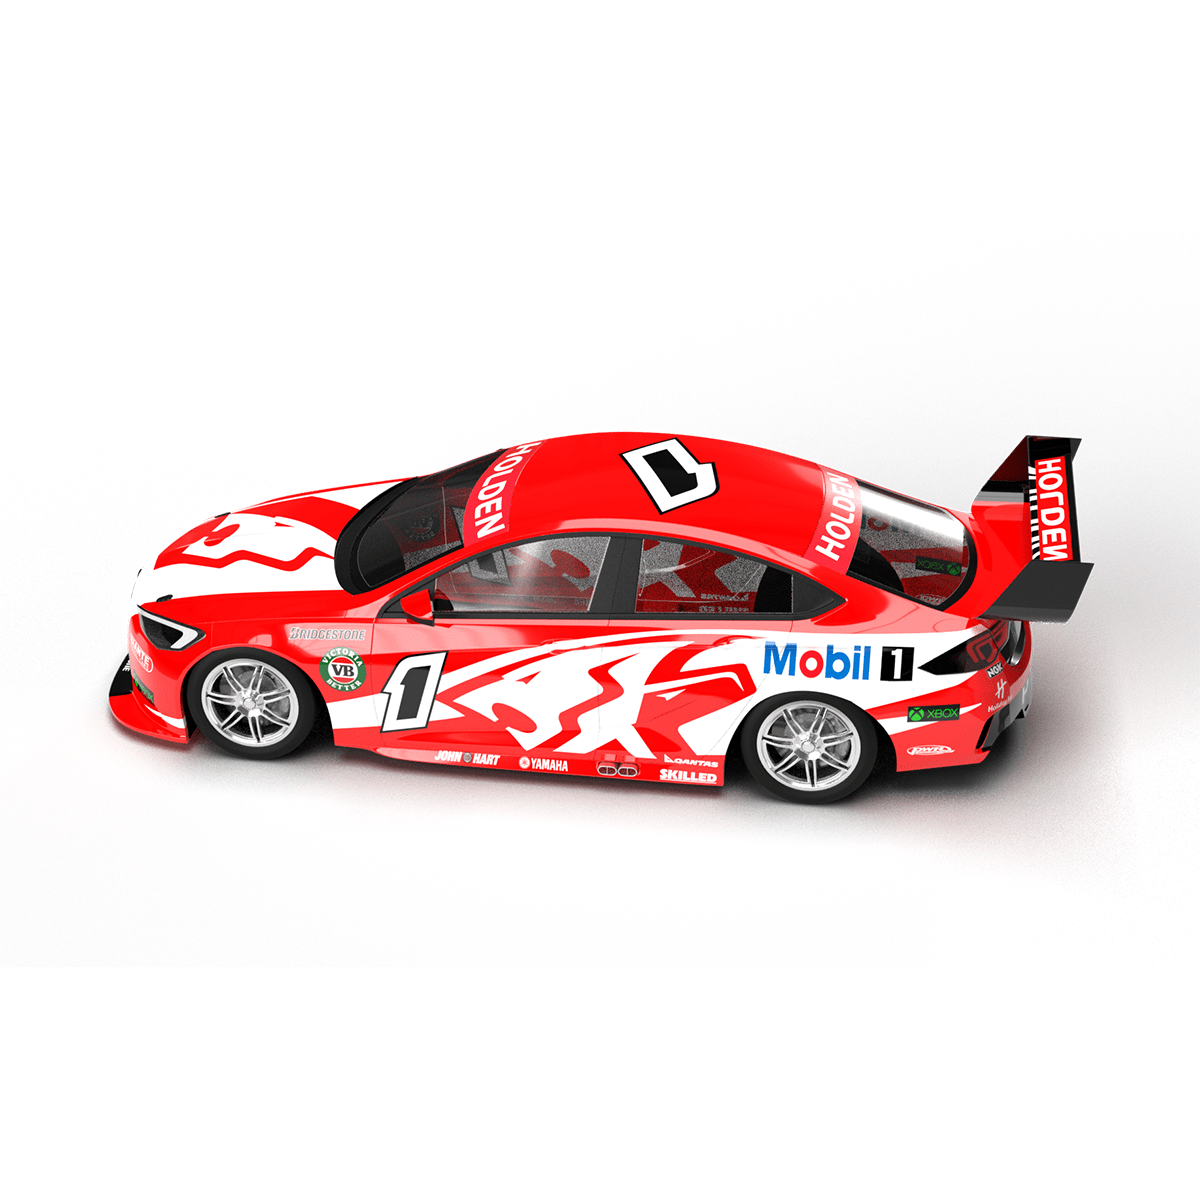 Holden Commodore ZB V8 Supercar 3D model livery template